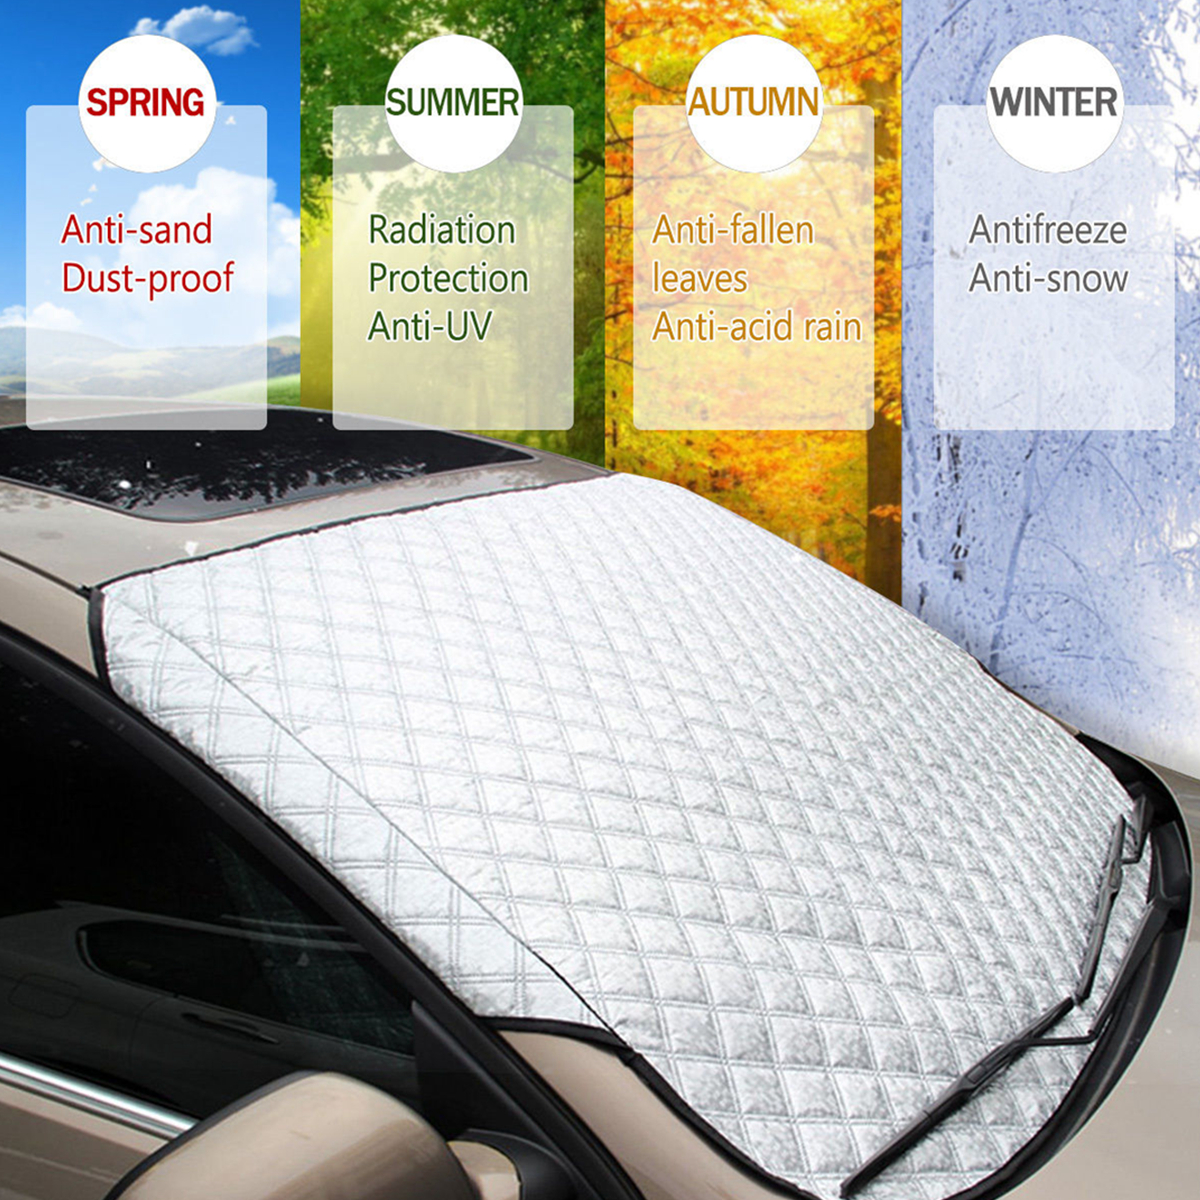 Car Cover All-seasons Windshield Waterproof Cover & Sun Shade UV Protector Cover with Cotton Thicker, Universal Car Cover for Auto SUV Small Car, 57.87(width) x 40.16(height) - image 2 of 9